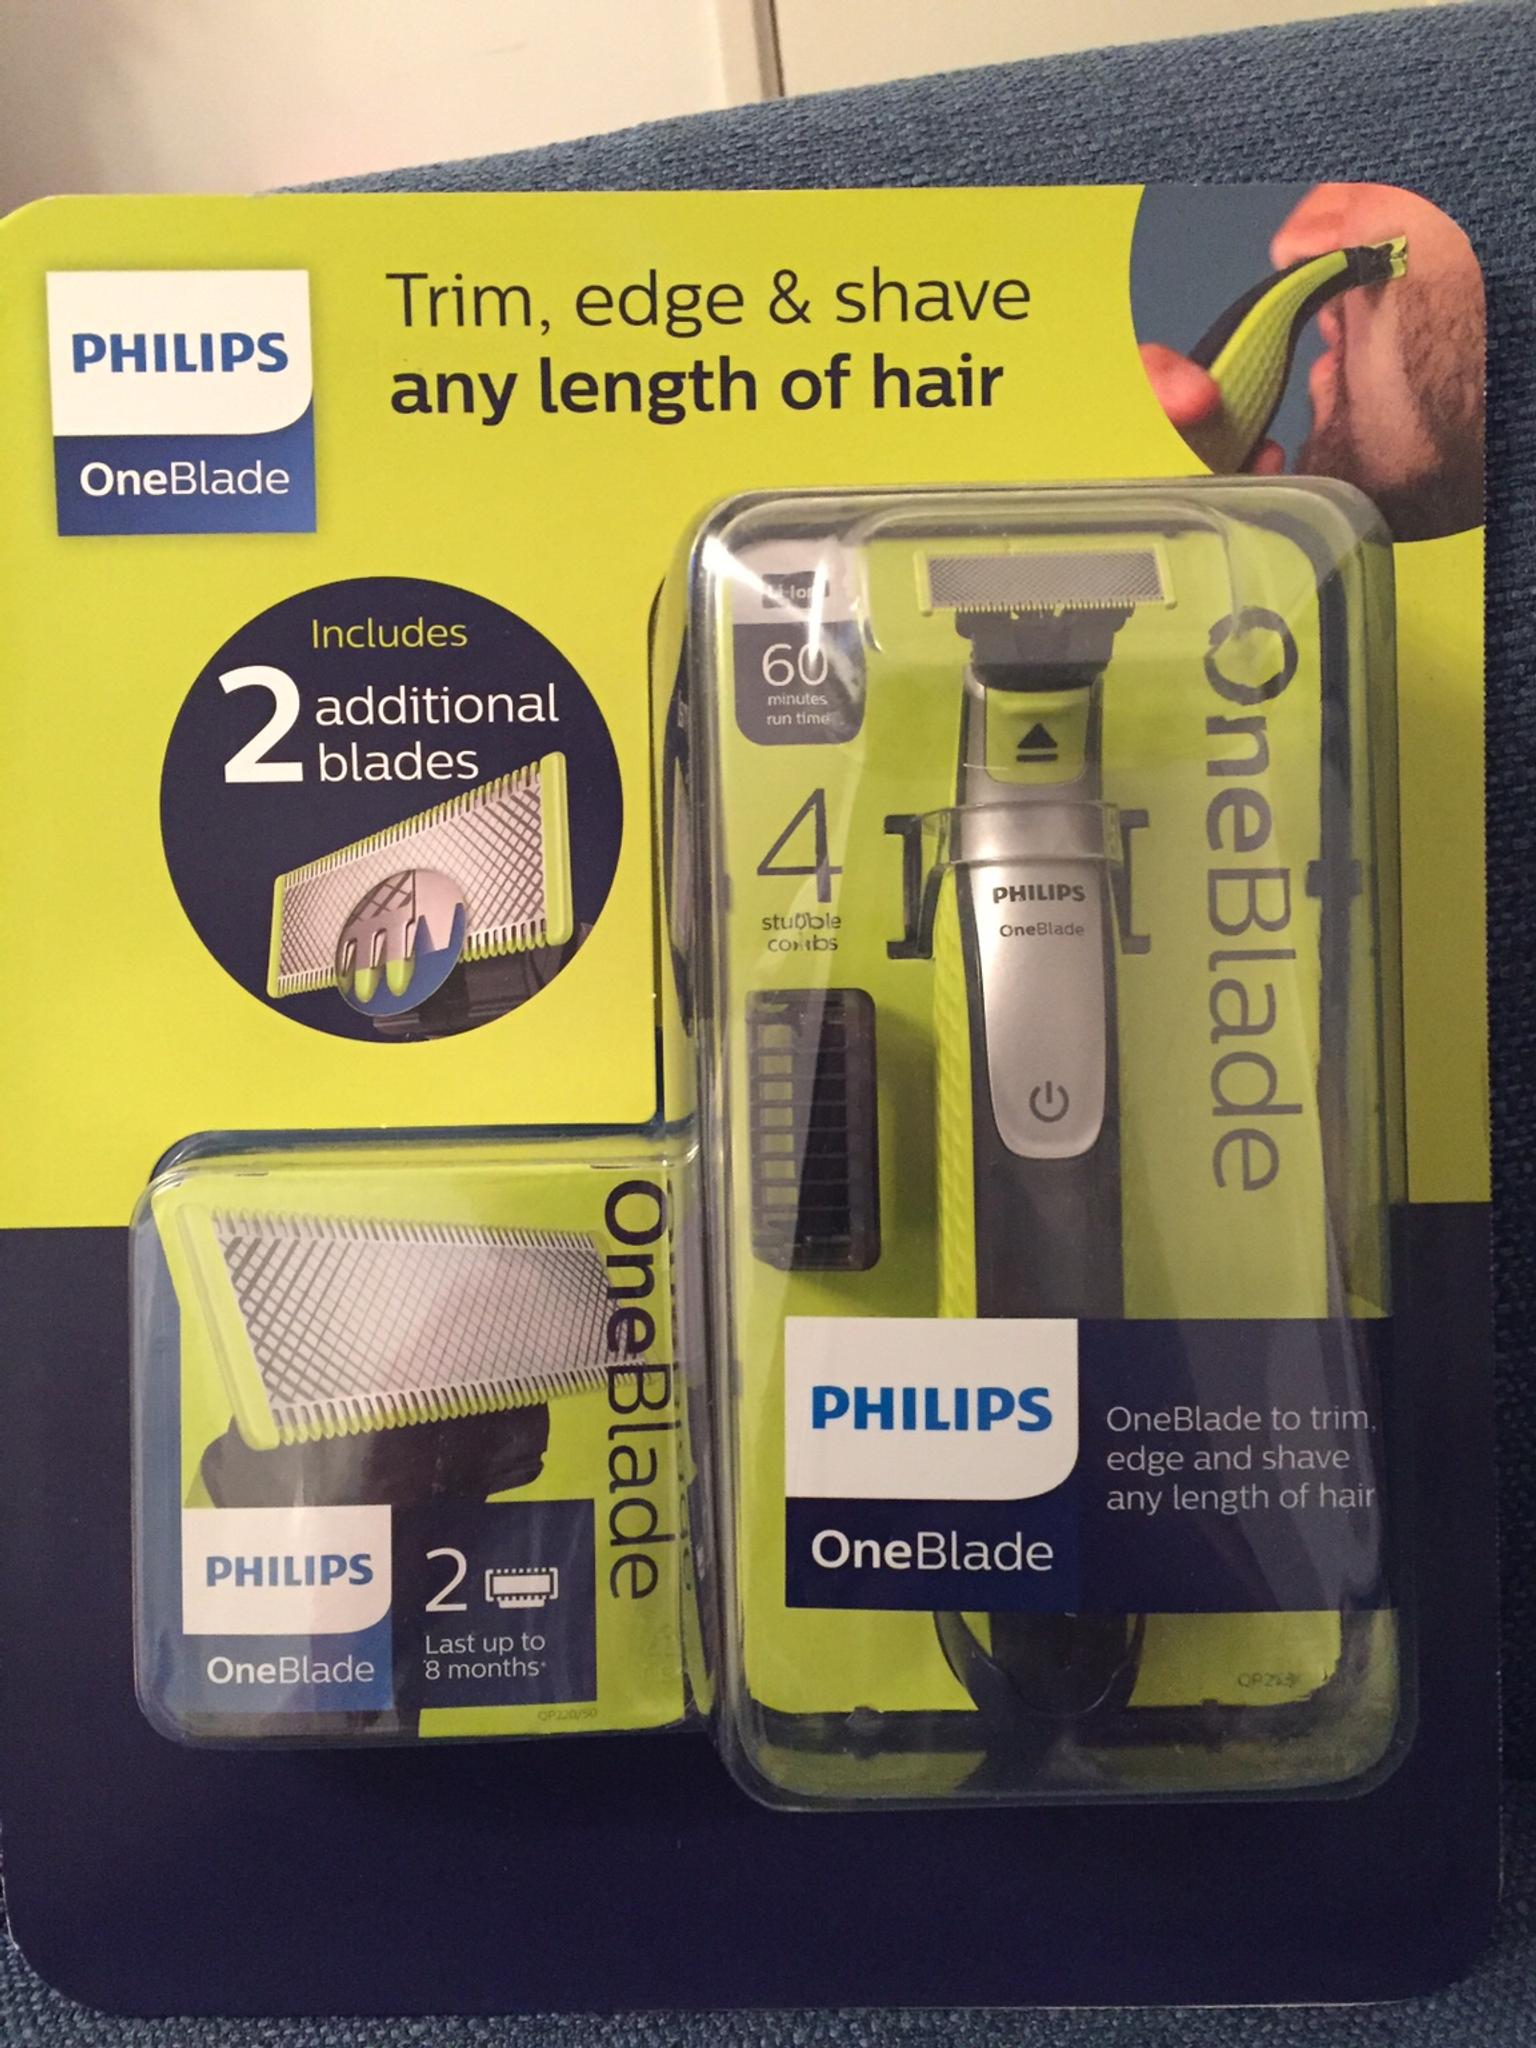 philips one blade for sale